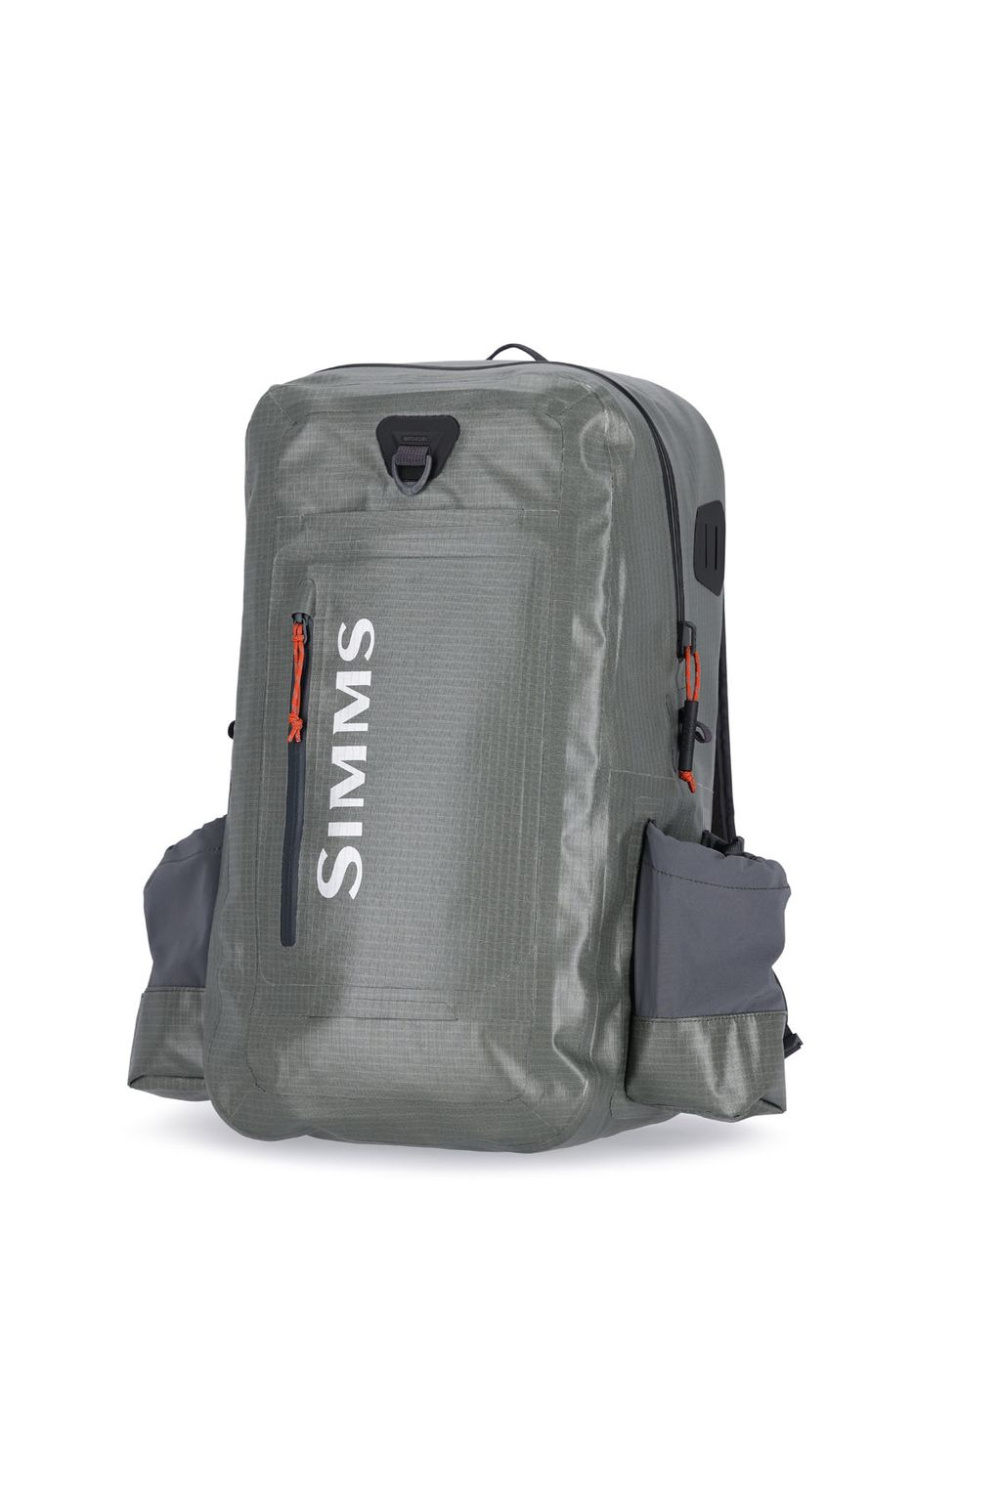 Simms Dry Creek Z Backpack Olive